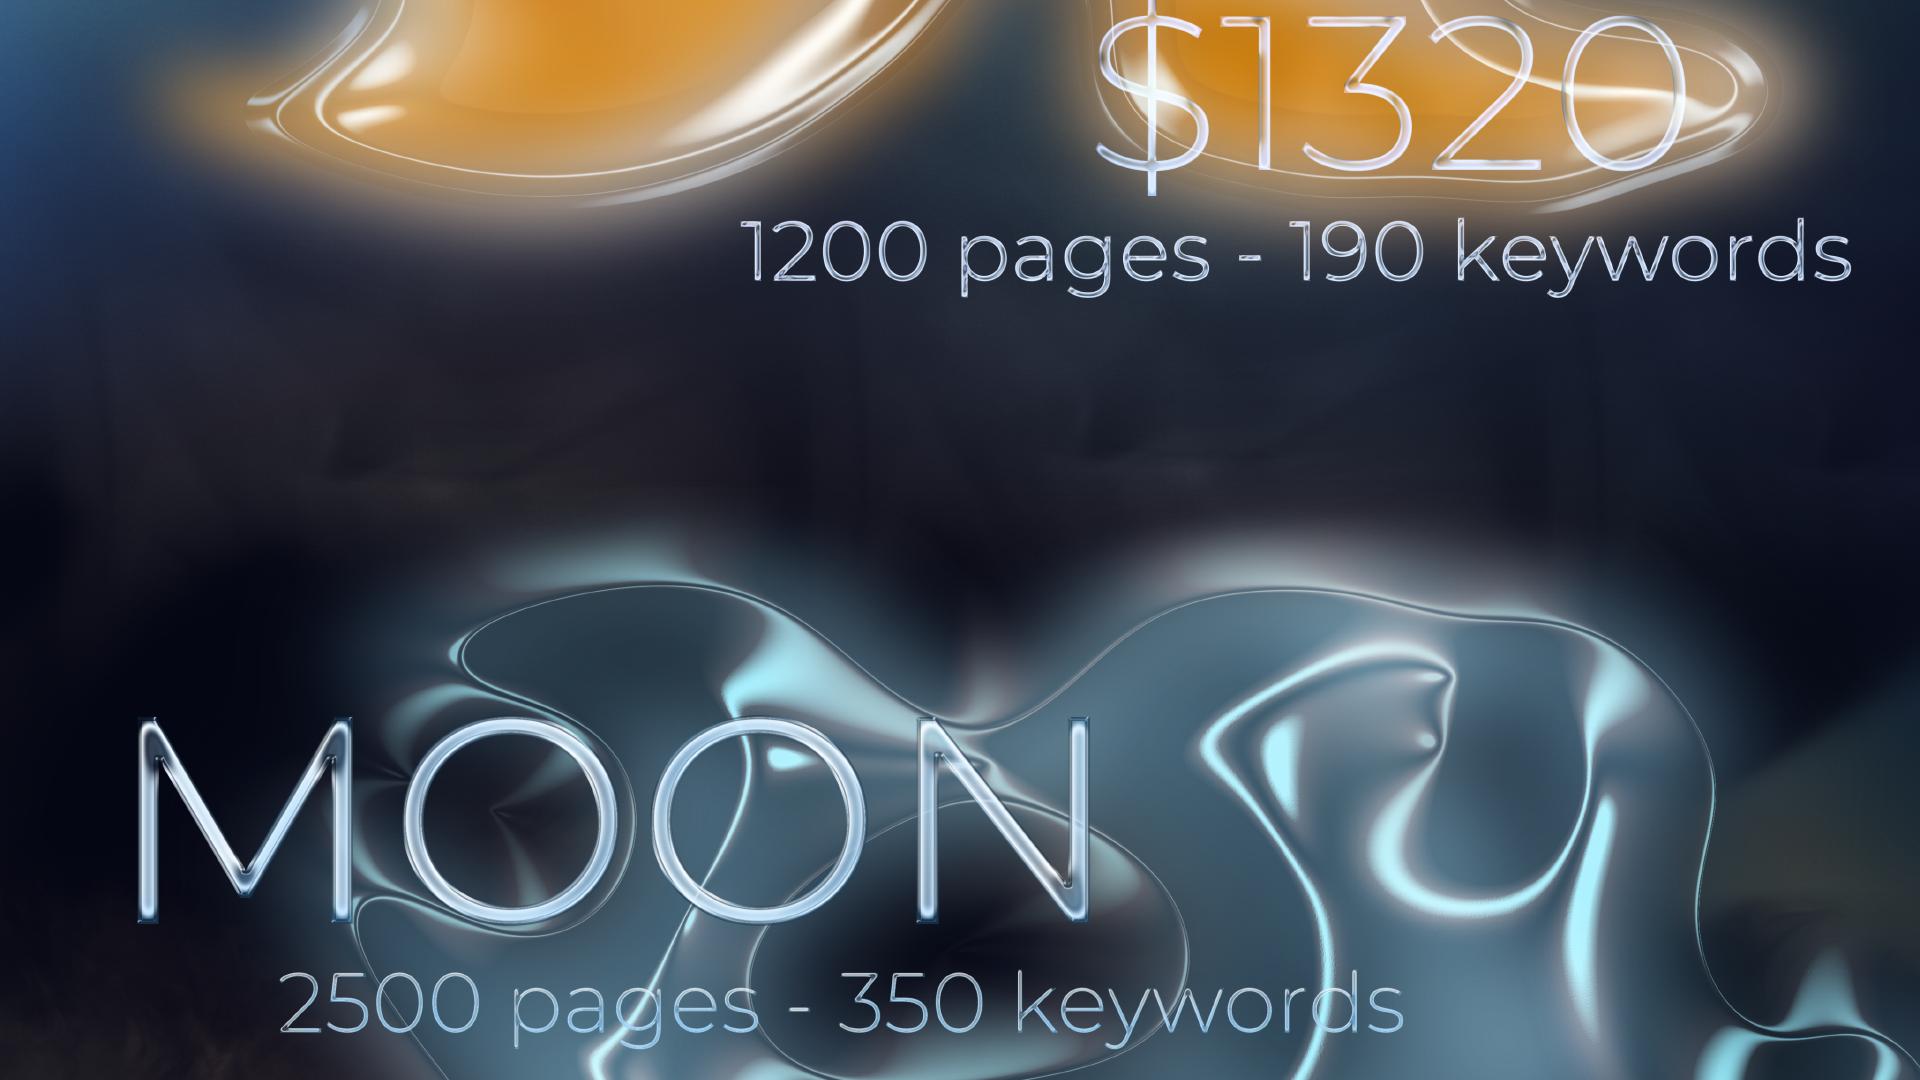 E-Commerce SEO package 'Moon': 2500 pages - 350 keywords for $1971